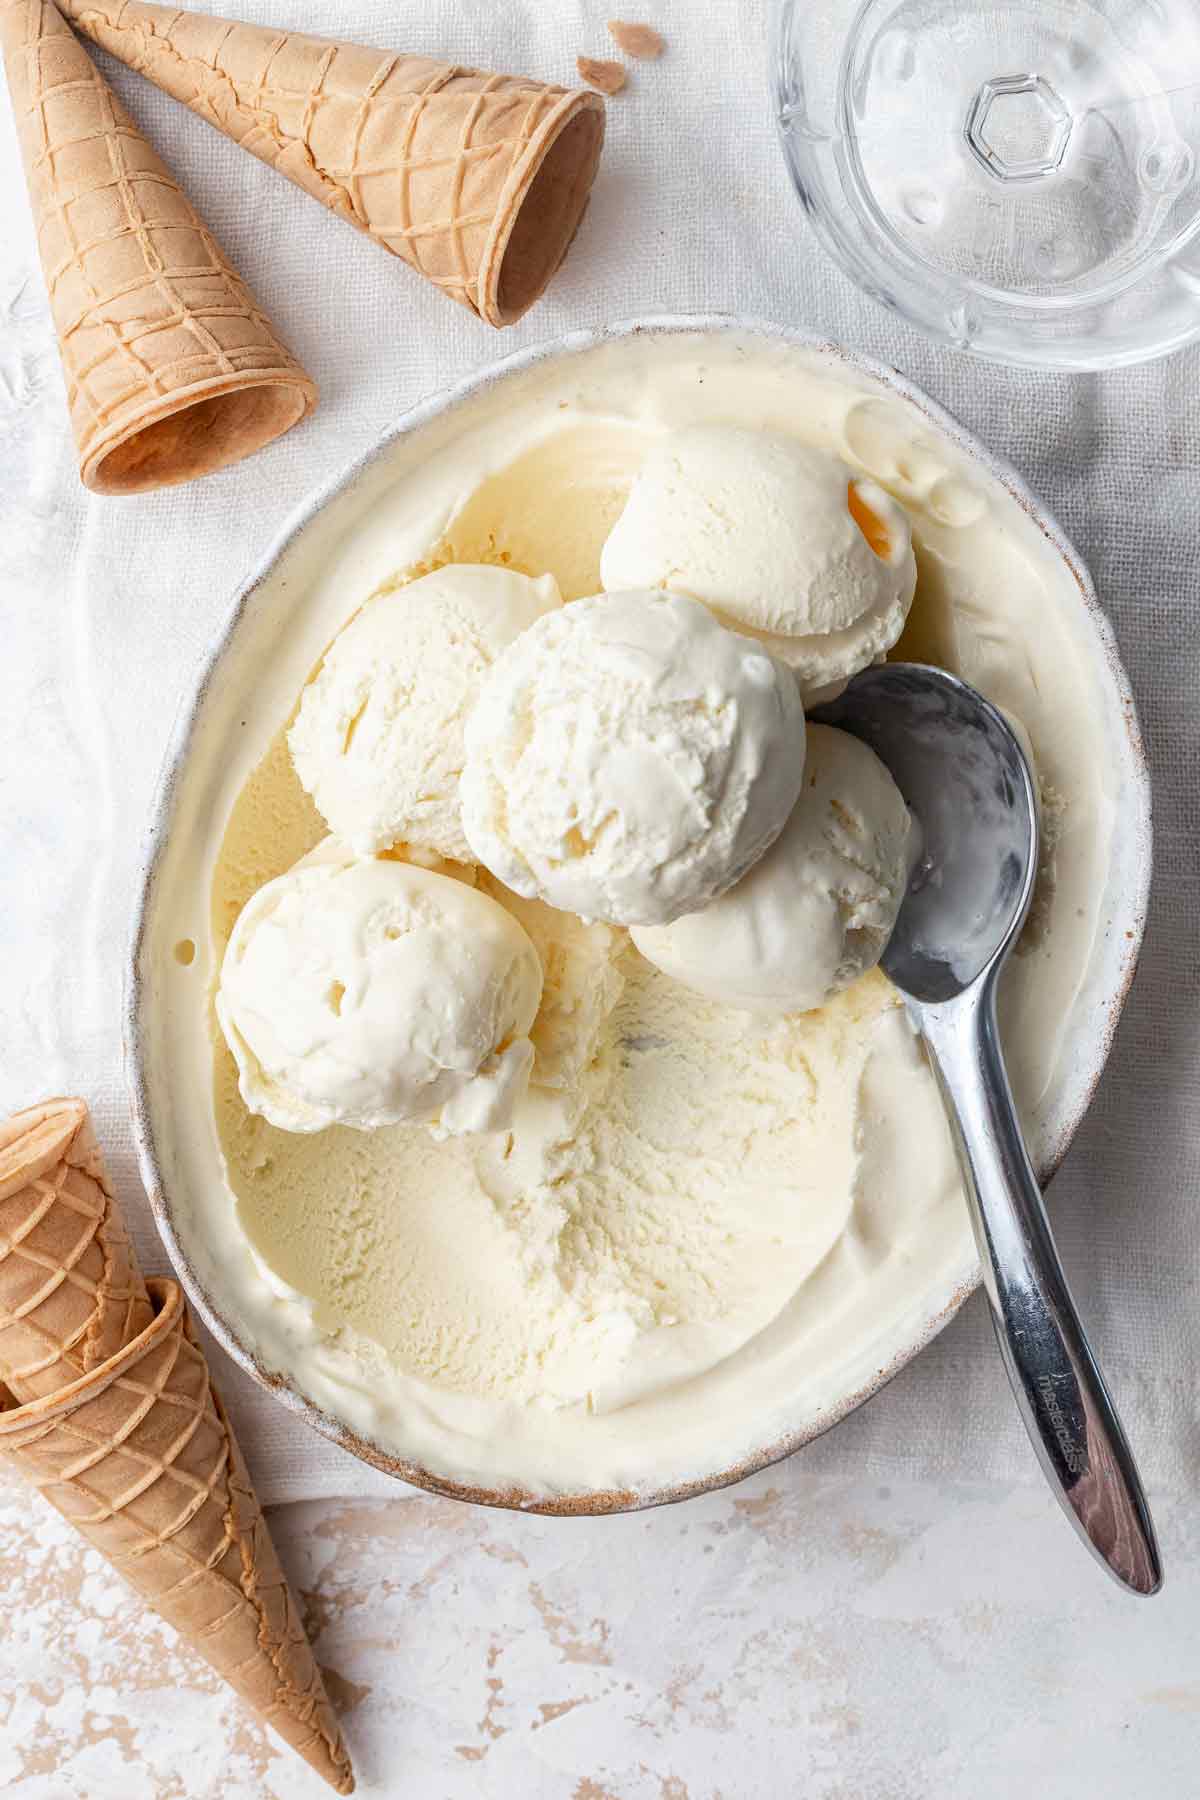 Homemade Ice Cream without a Maker